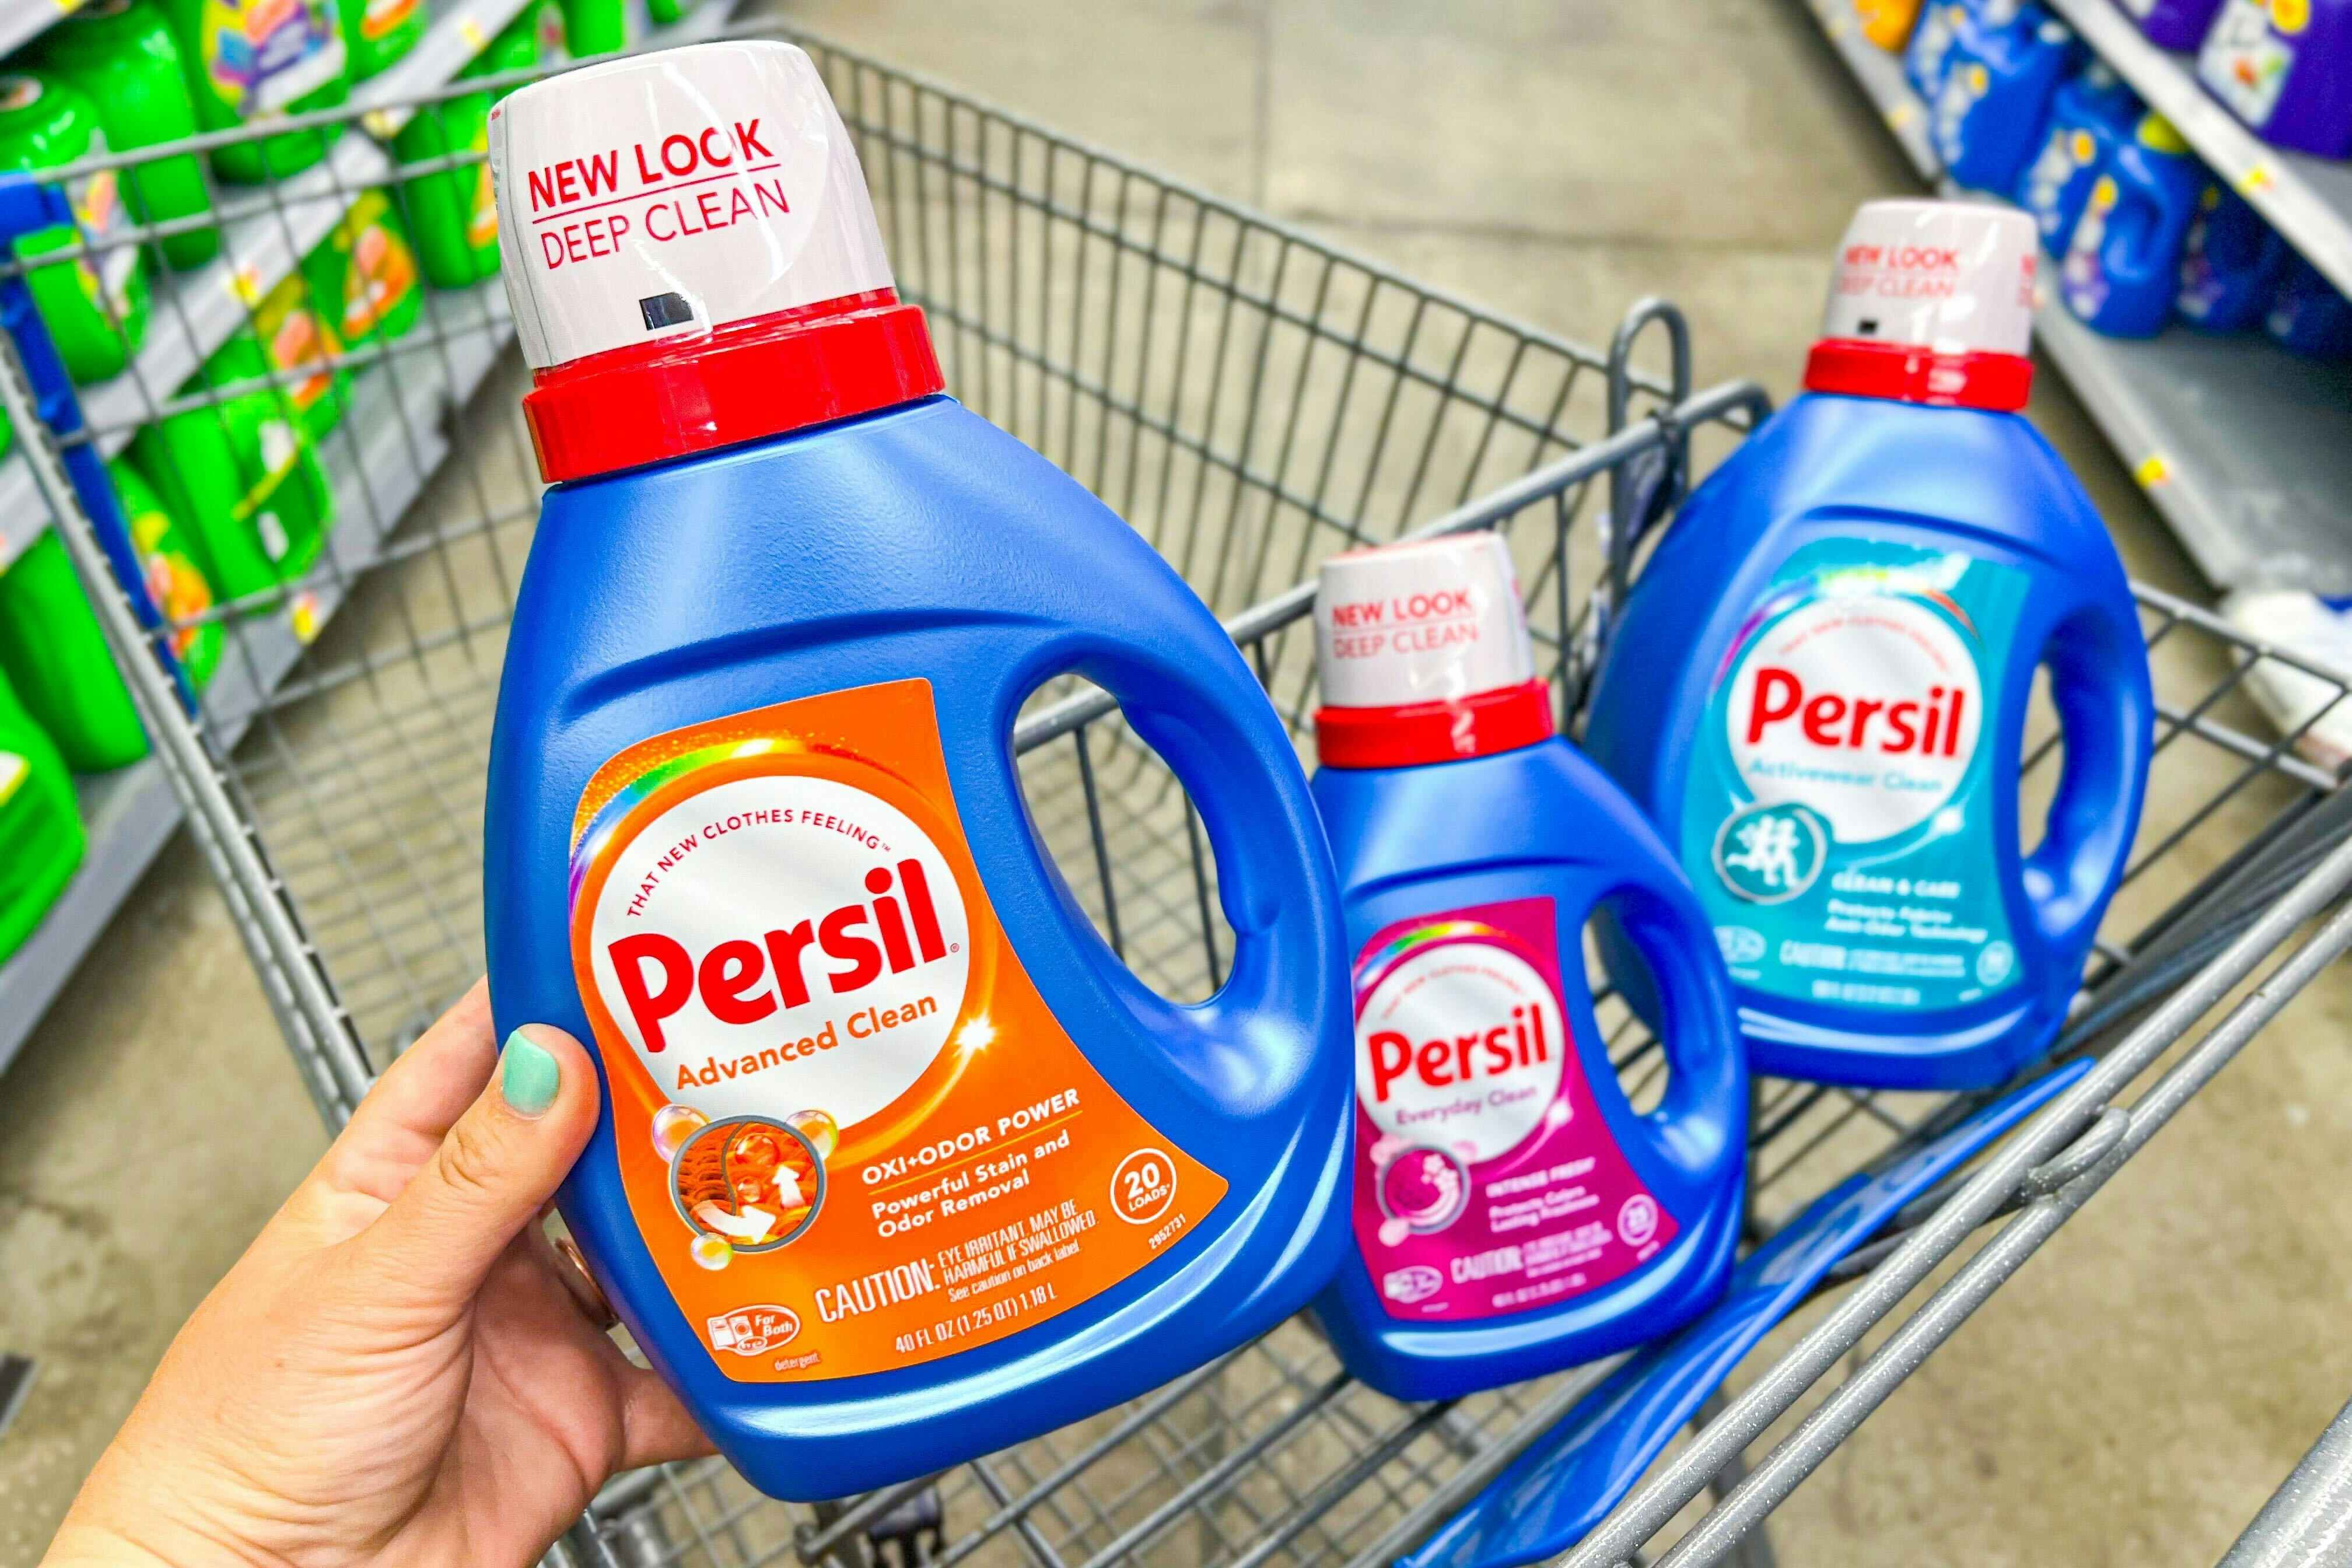 Stock Up on Persil Detergent — As Low as $0.16 per Load at Walmart